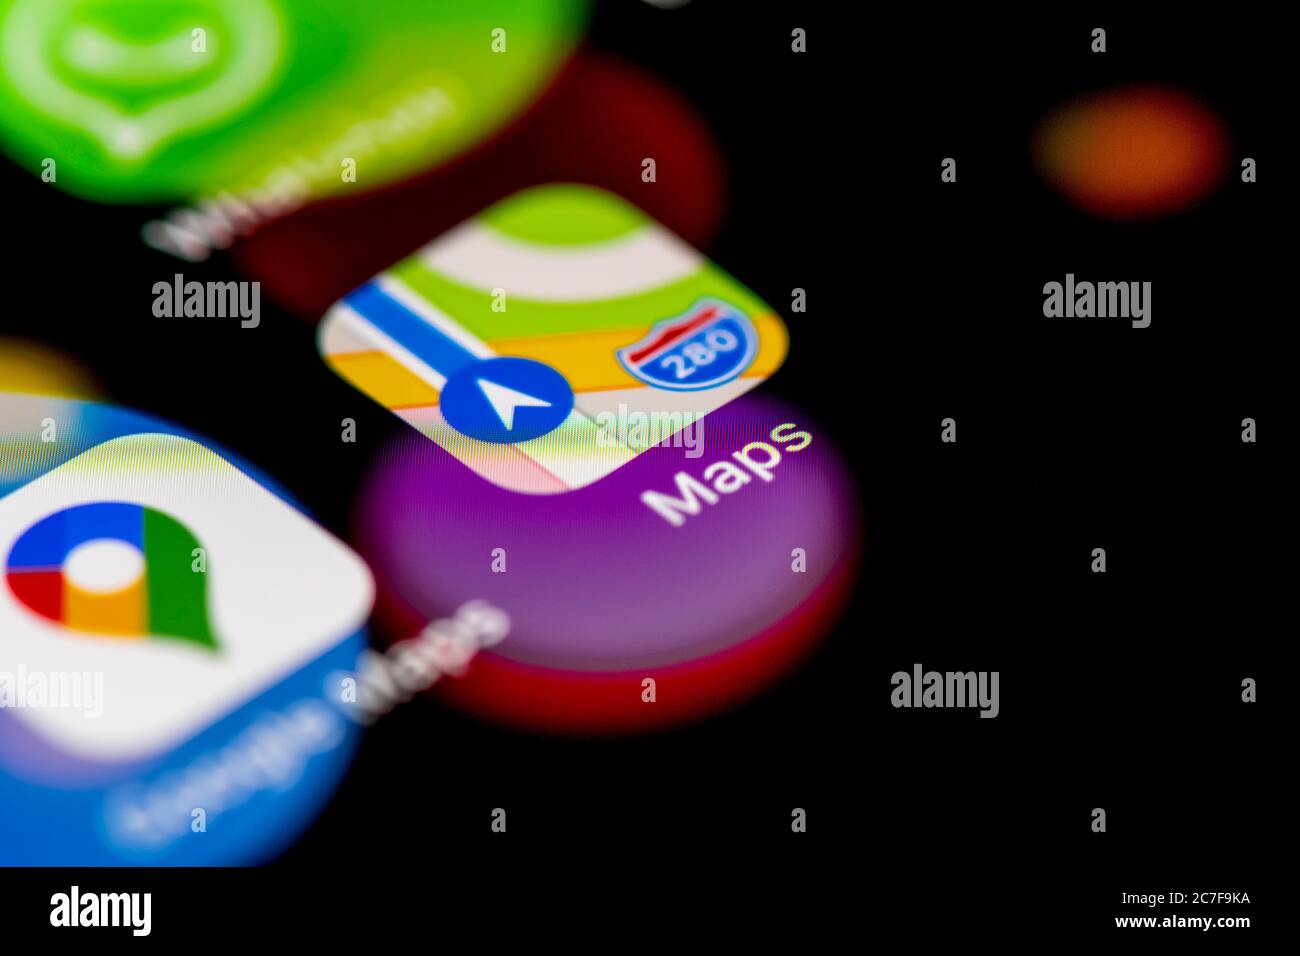 Apple Maps Icon, App Icons on a mobile phone display, iPhone, Smartphone, close-up Stock Photo